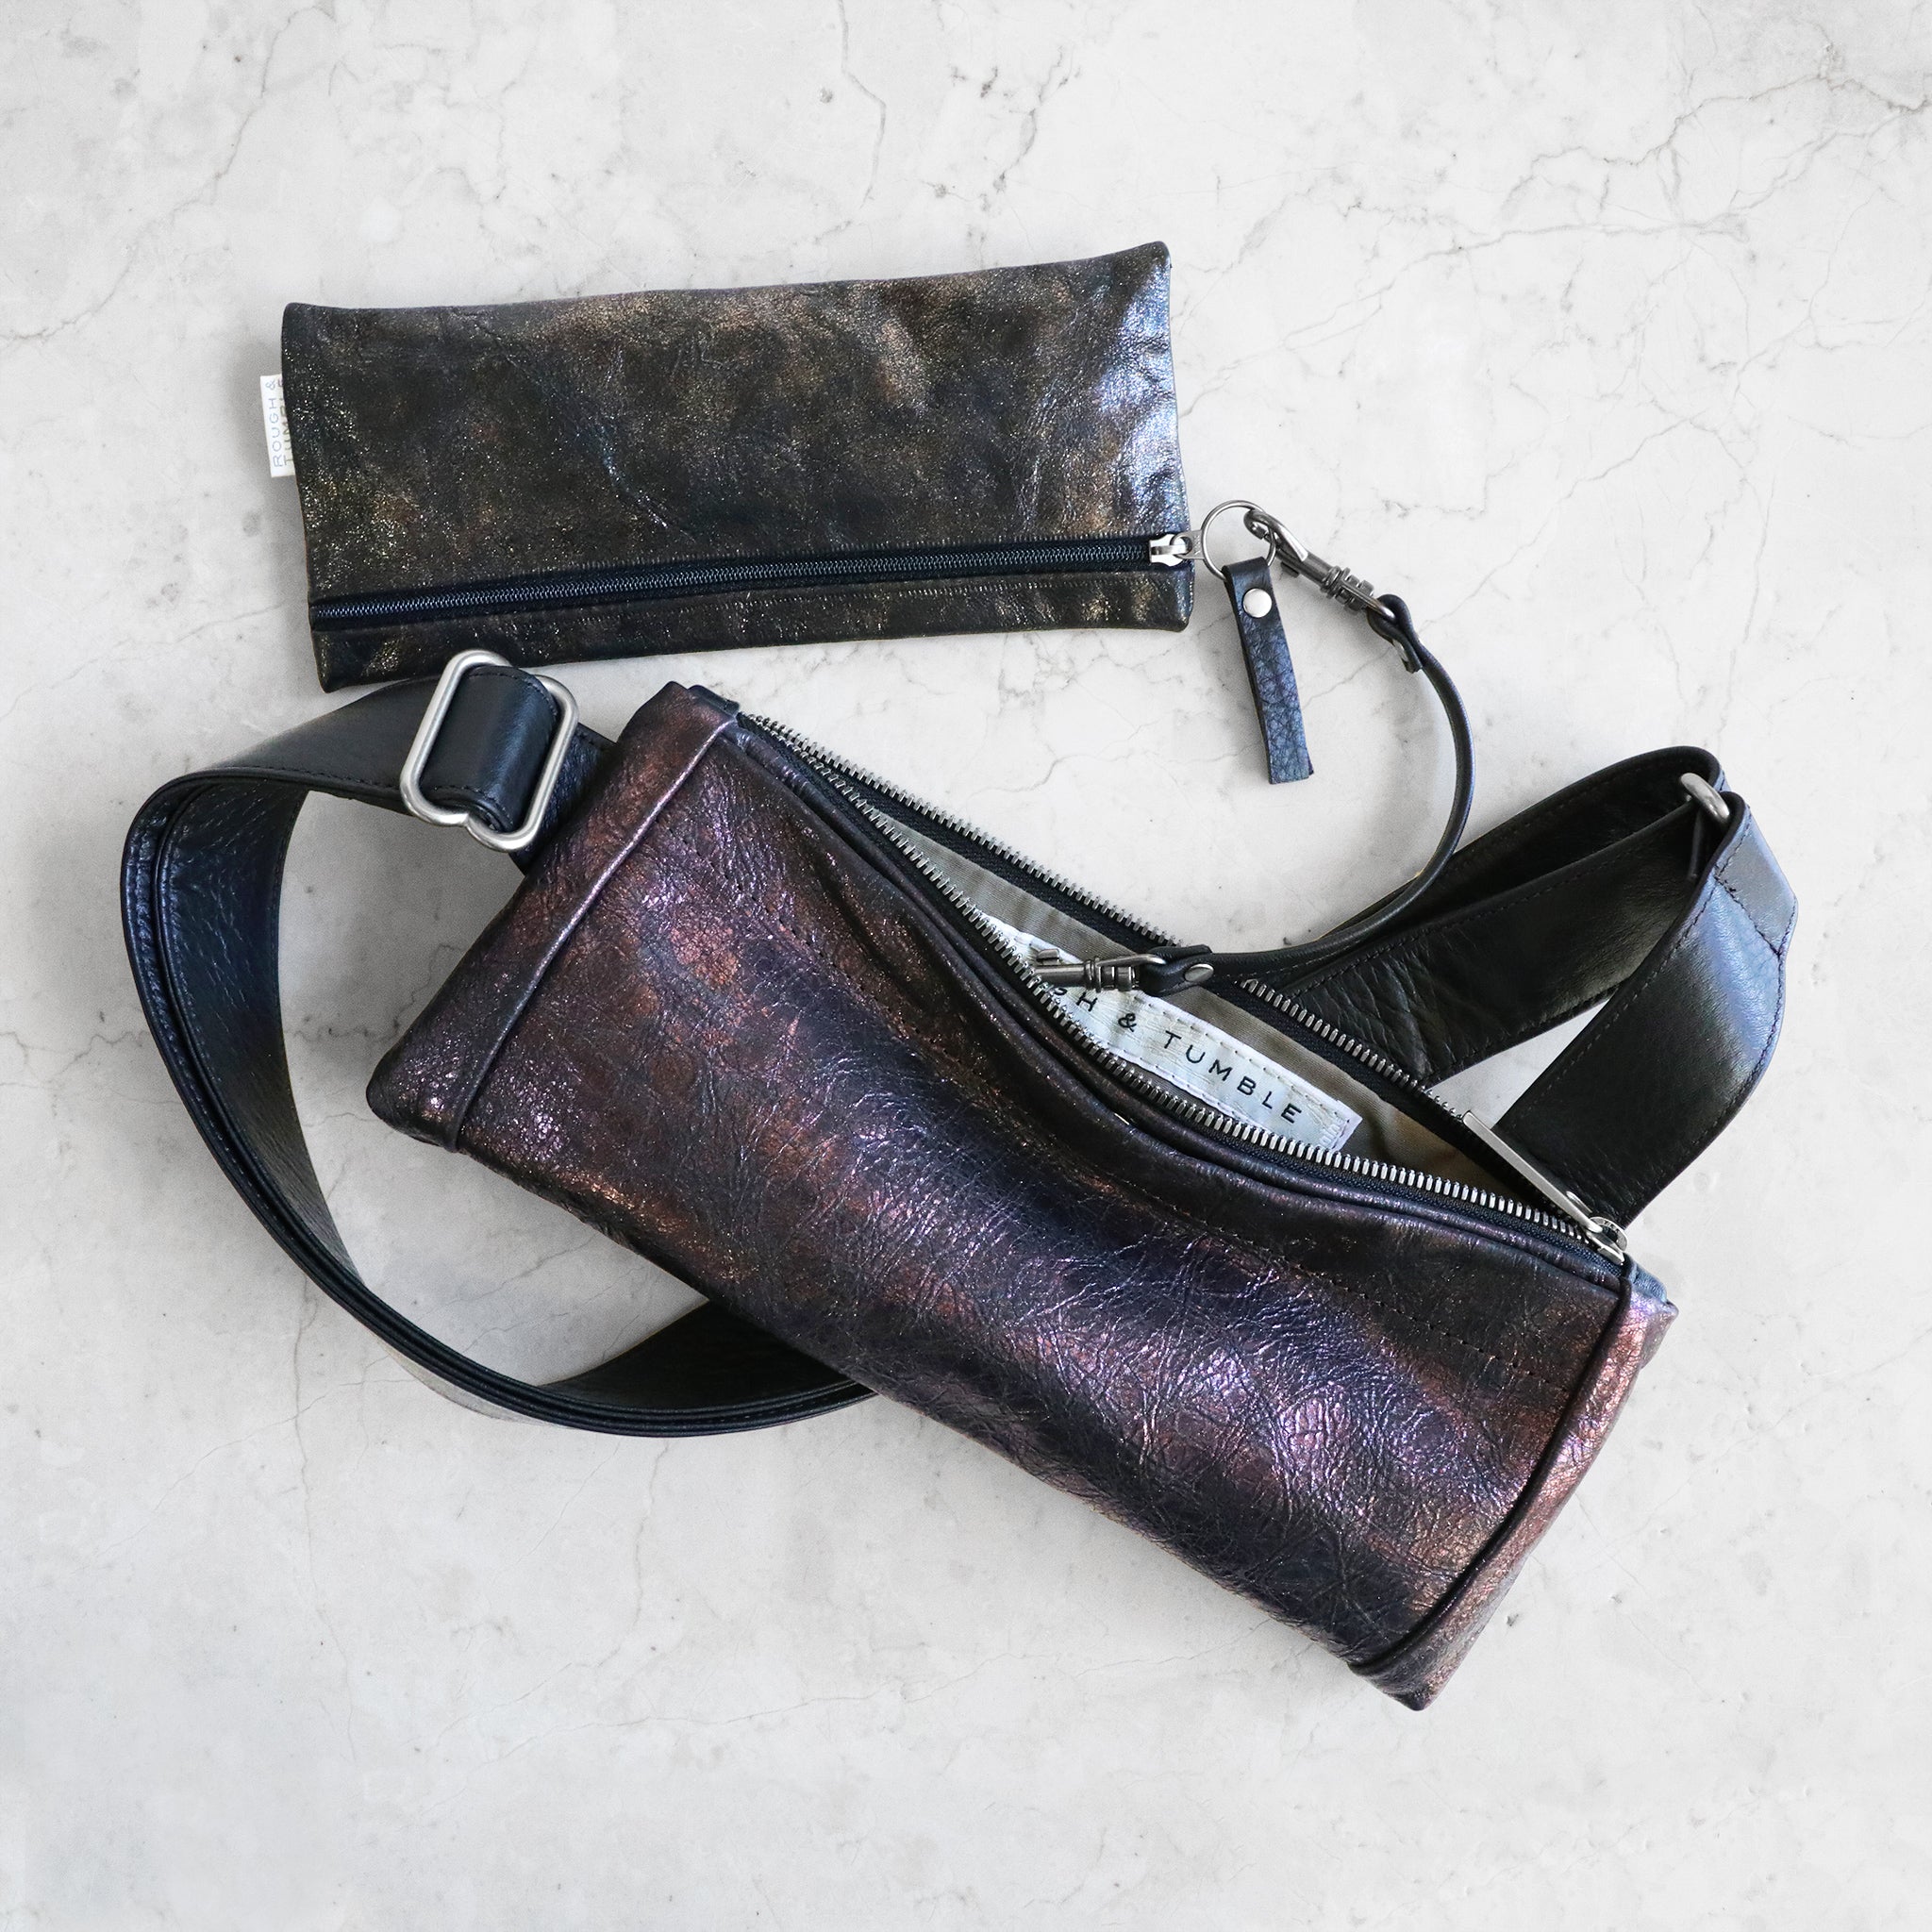 district slip in mica bronze and black with district sling in mica amethyst and black